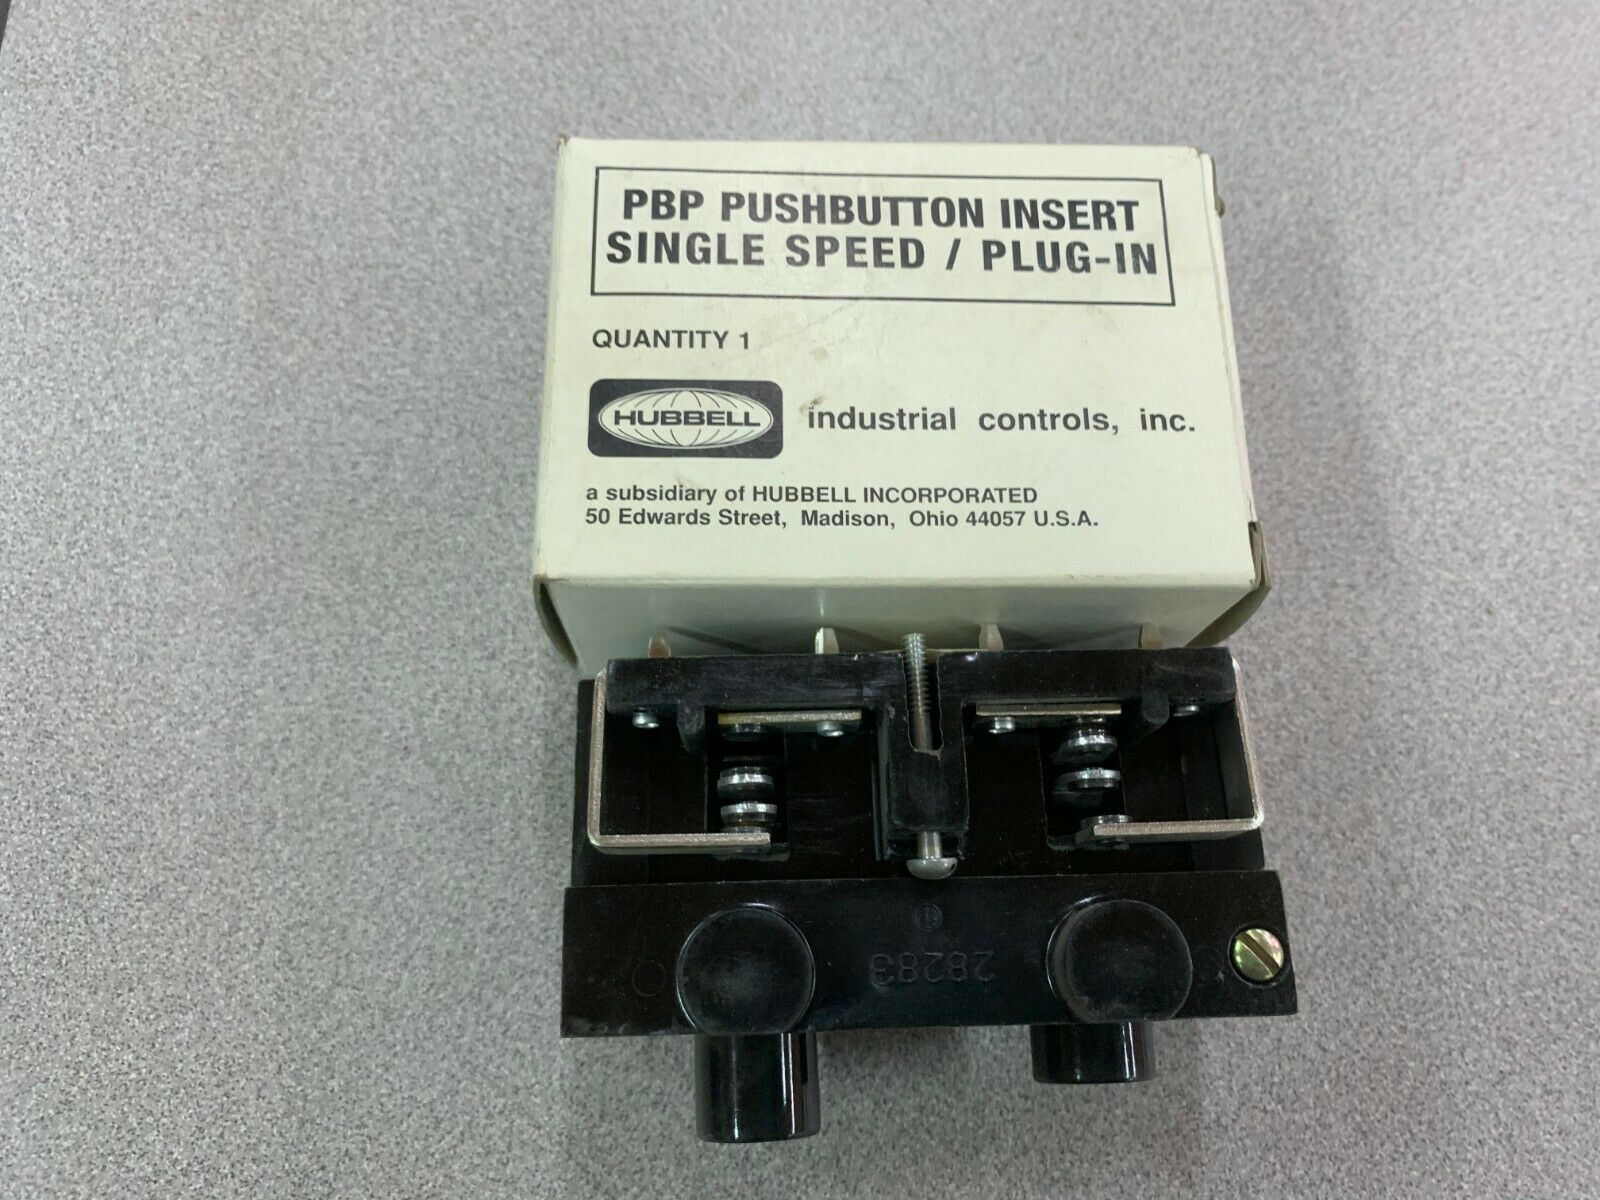 NEW IN BOX HUBBELL PBP PUSHBUTTON INSERT PG3